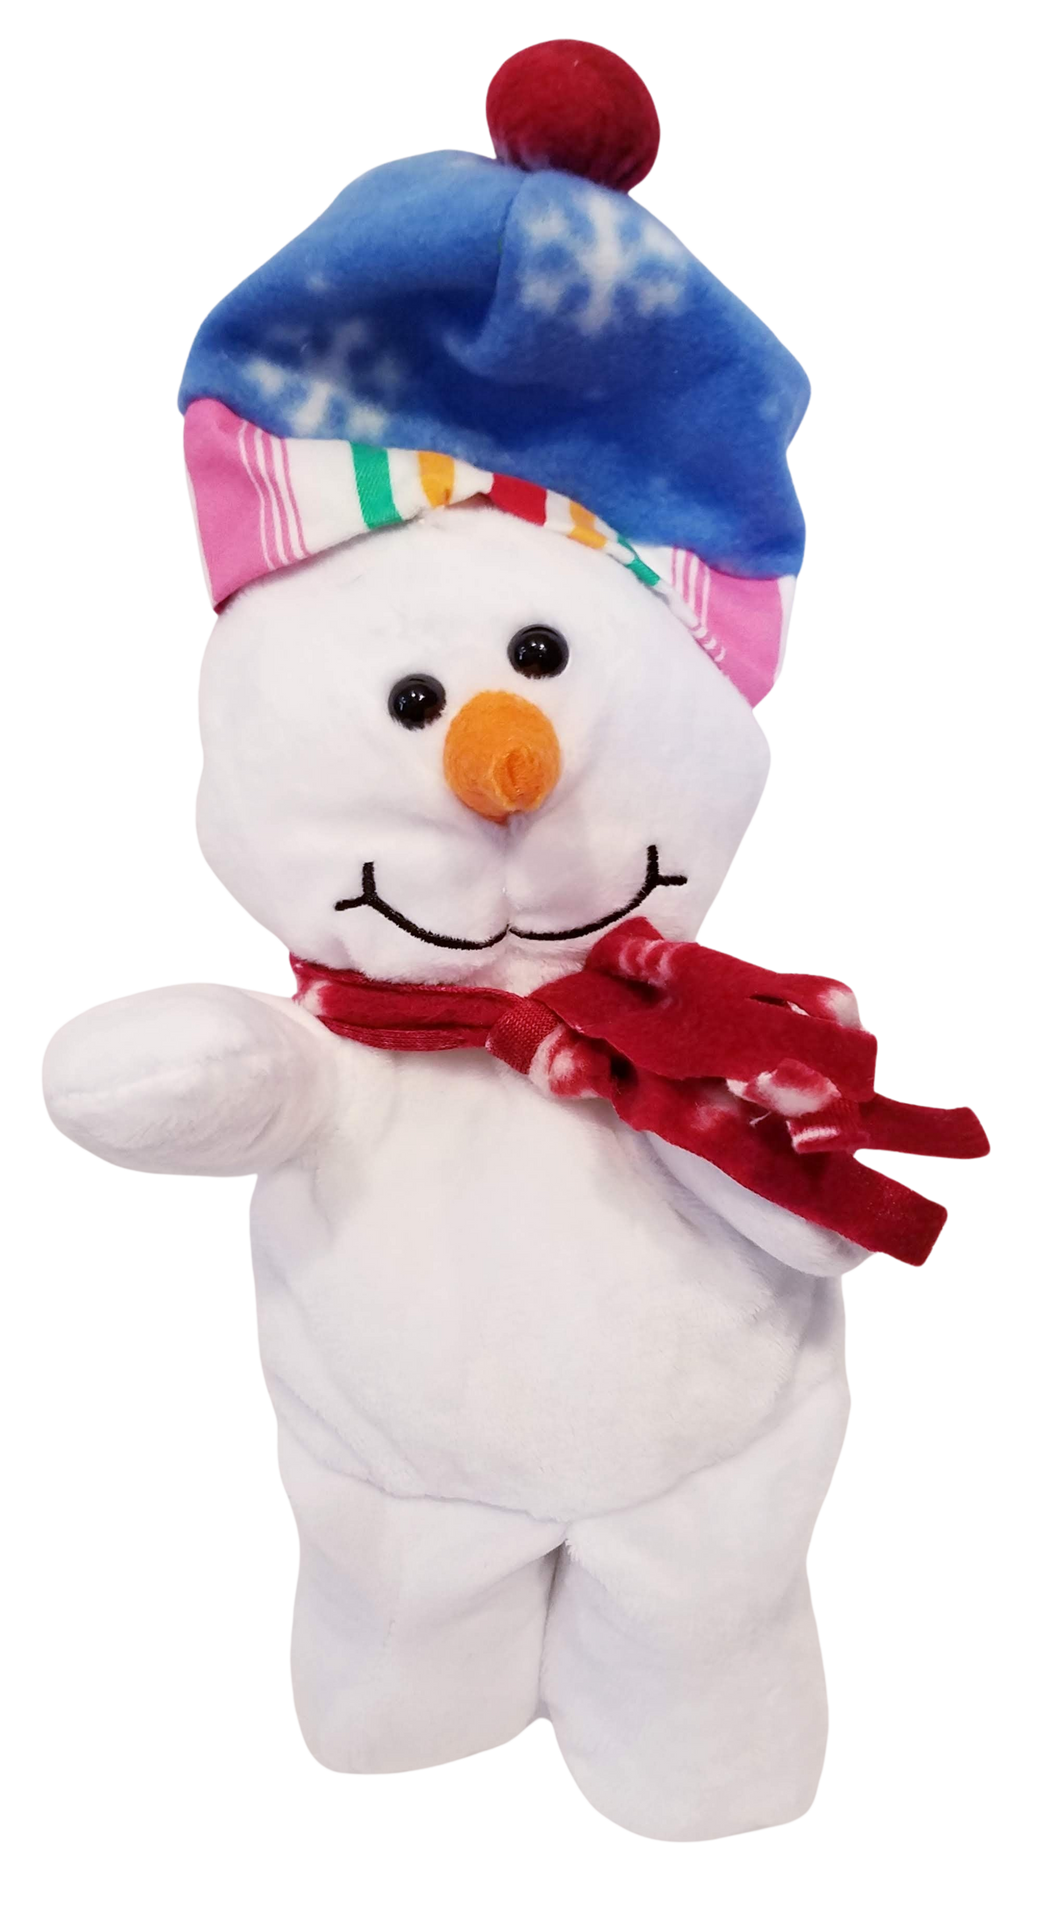 Plush snowman with blue hat/red scarf with snowflakes 12